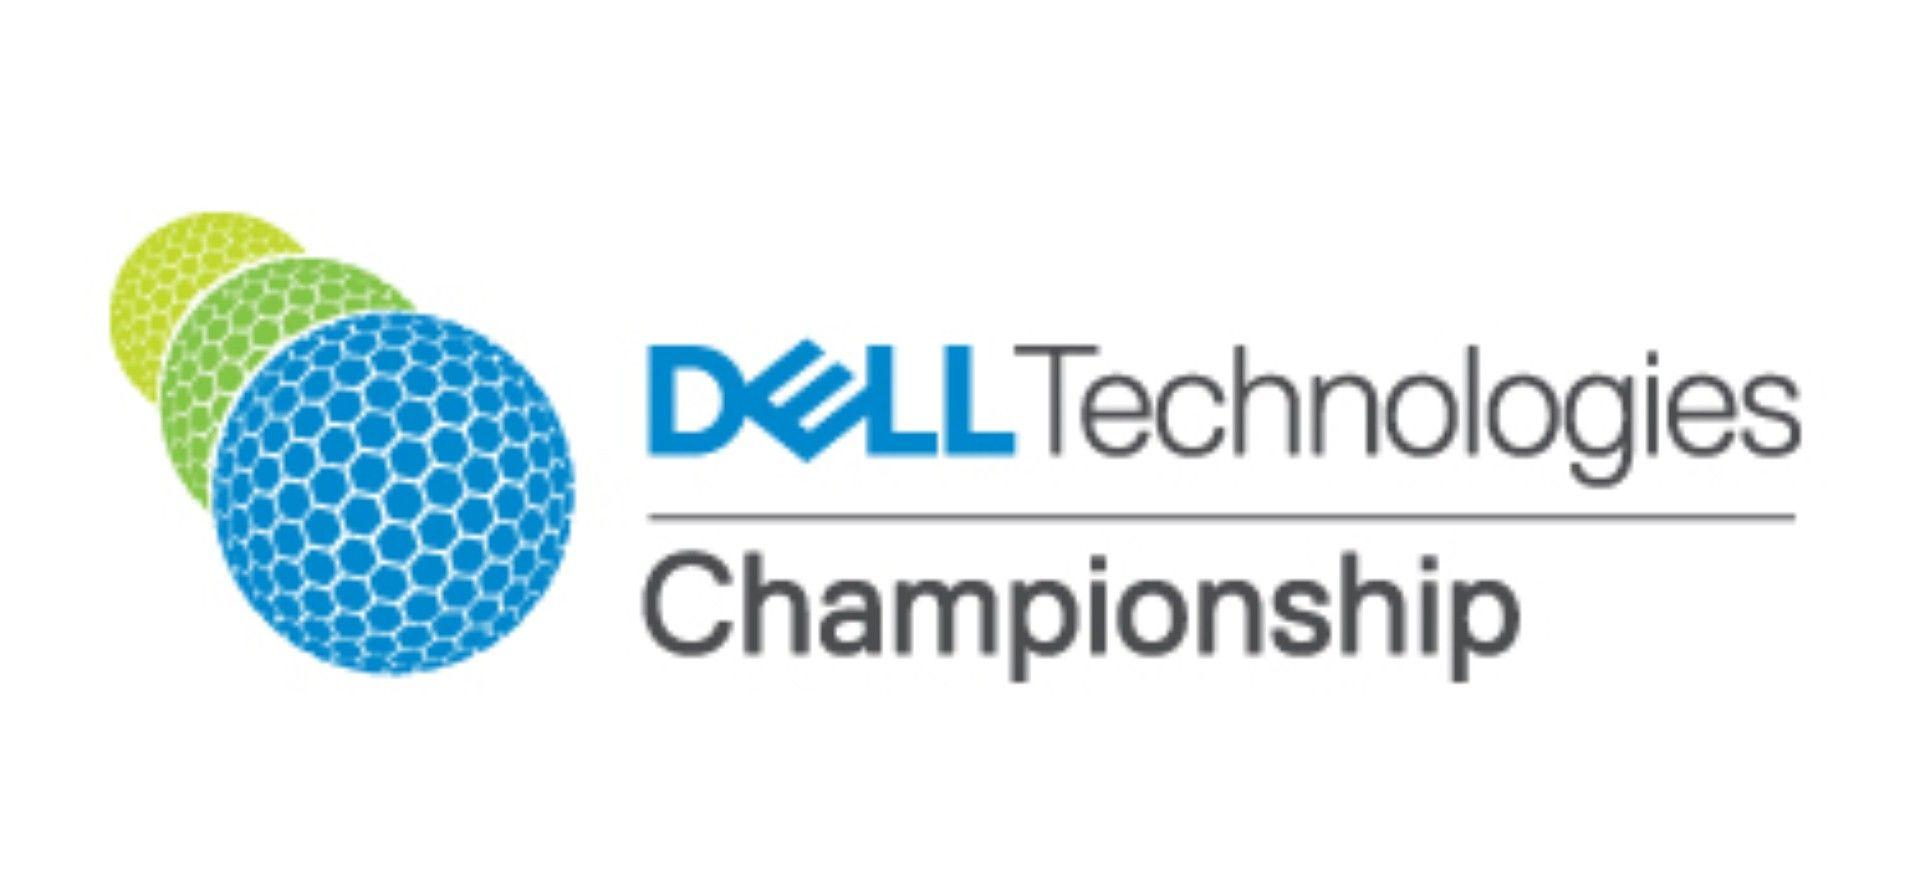 Dell Technologies Logo - 2017 Dell Technologies Championship Ticket Prices & Hospitality ...